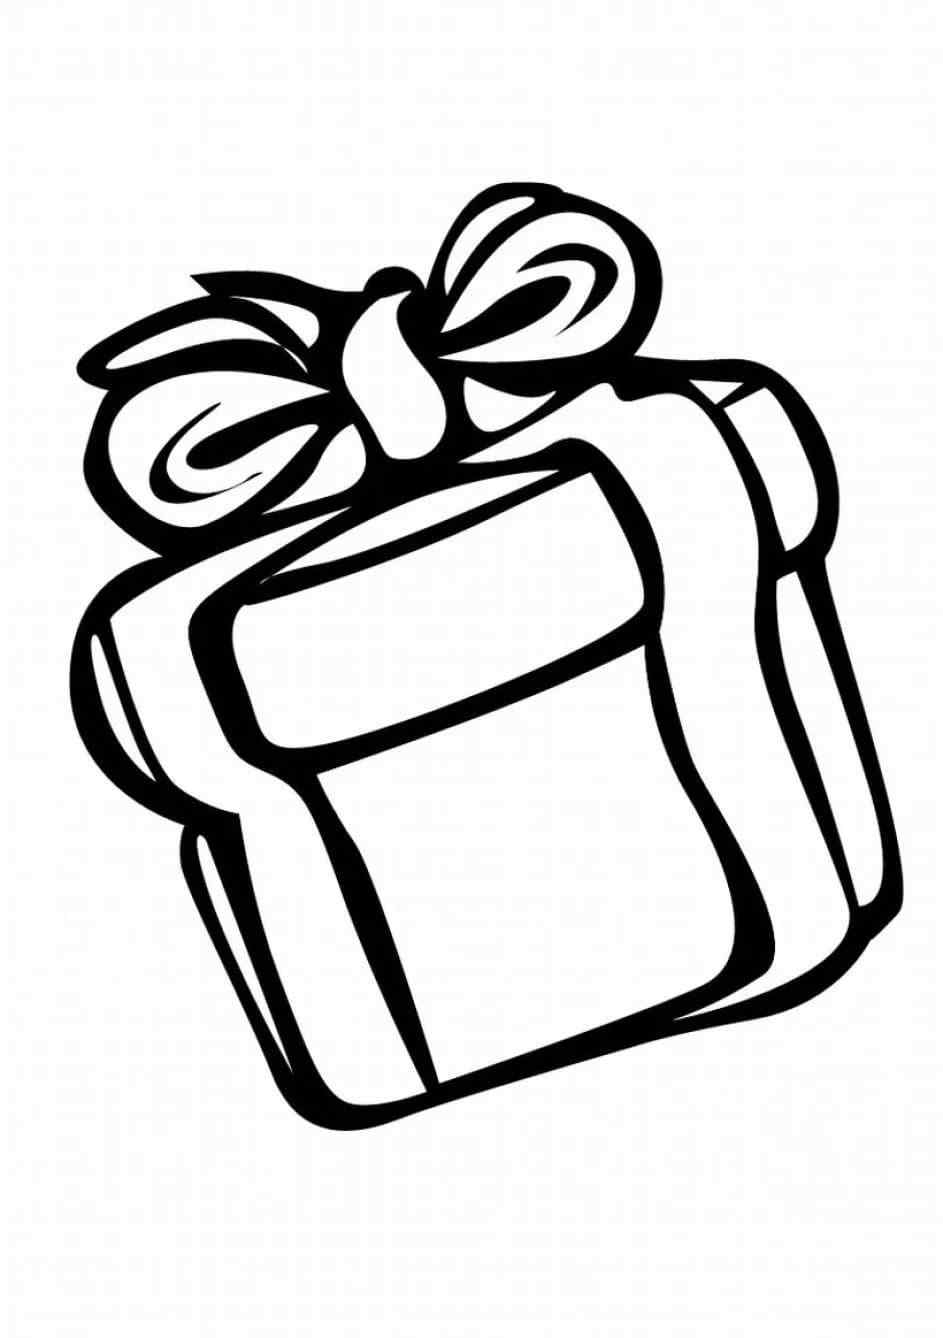 Decorated Gift Box Coloring Page